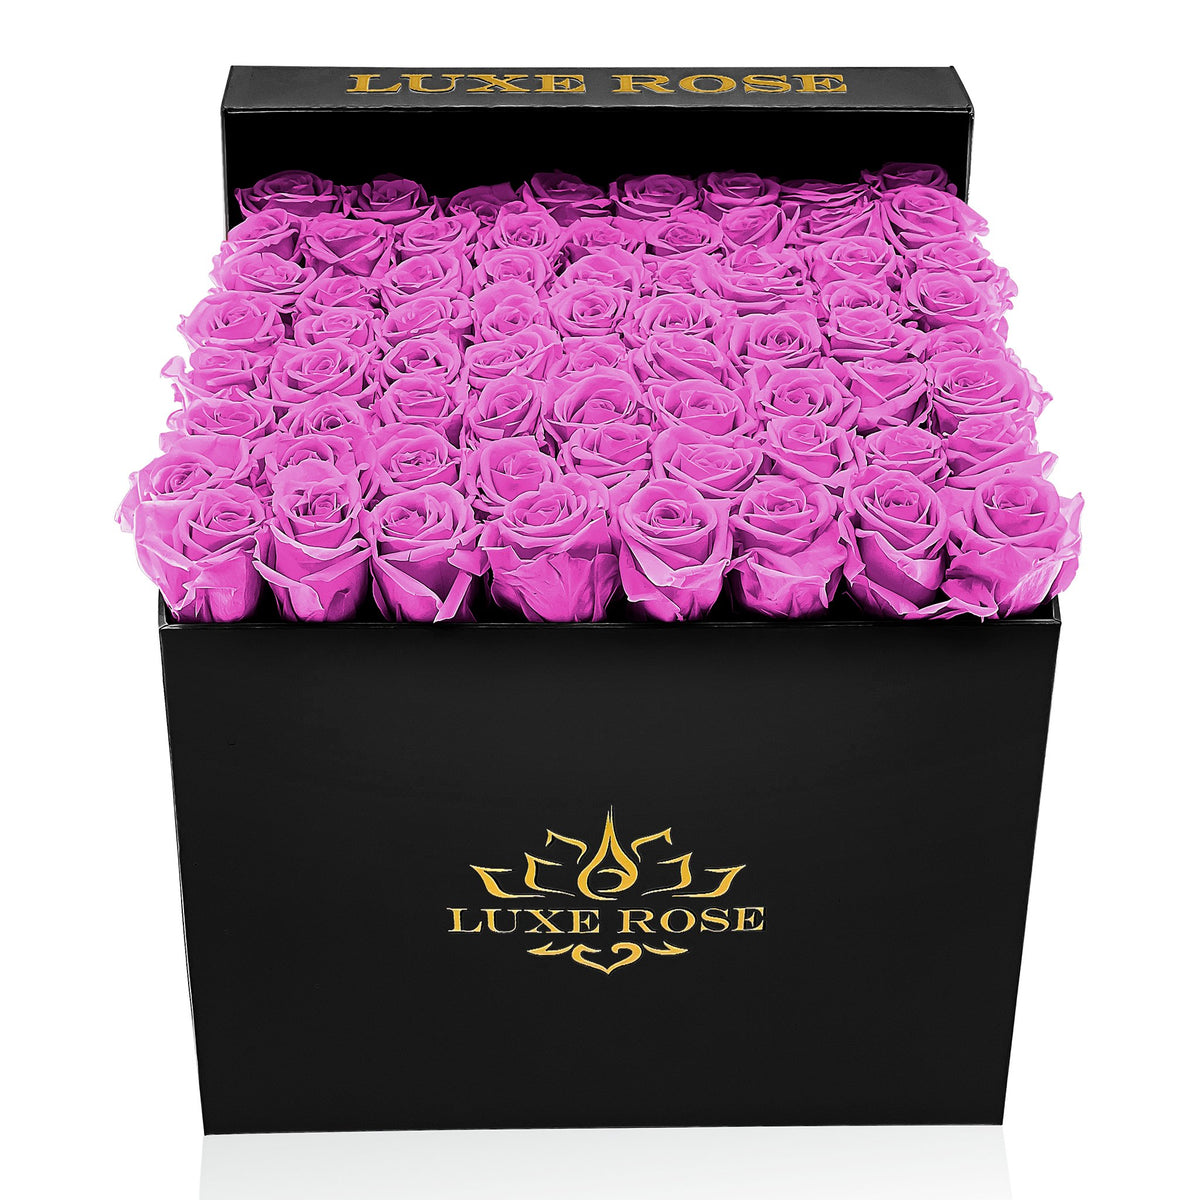 NYC Flower Delivery - Preserved Roses Large Box | Hot Pink - Black - Roses